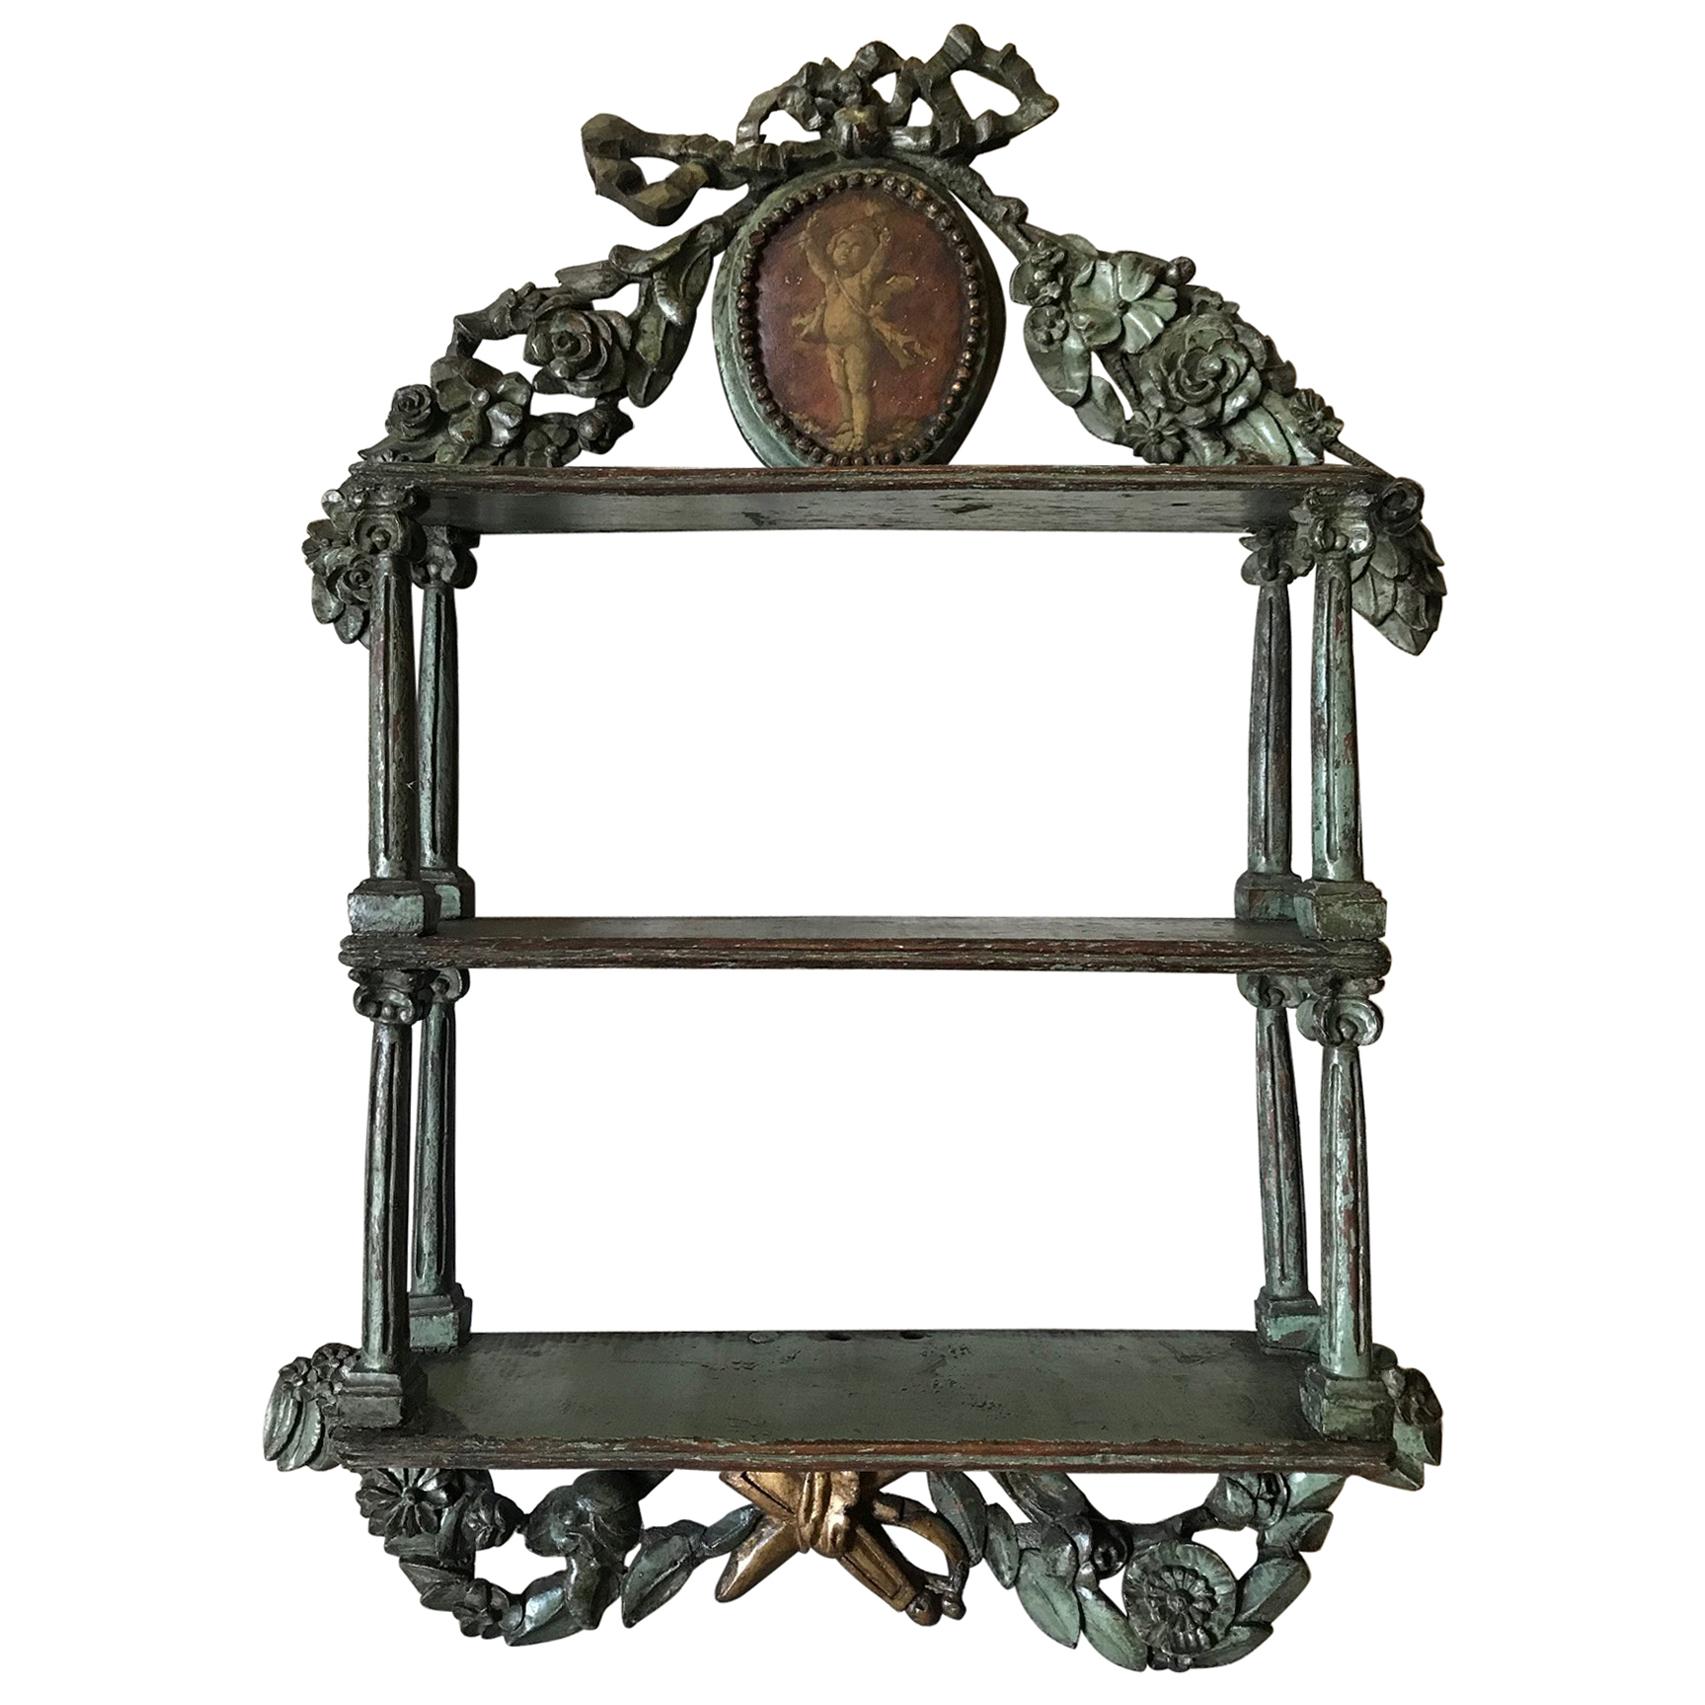 18th Century Carved and Painted Wood Etagere Wall Shelf, Provence